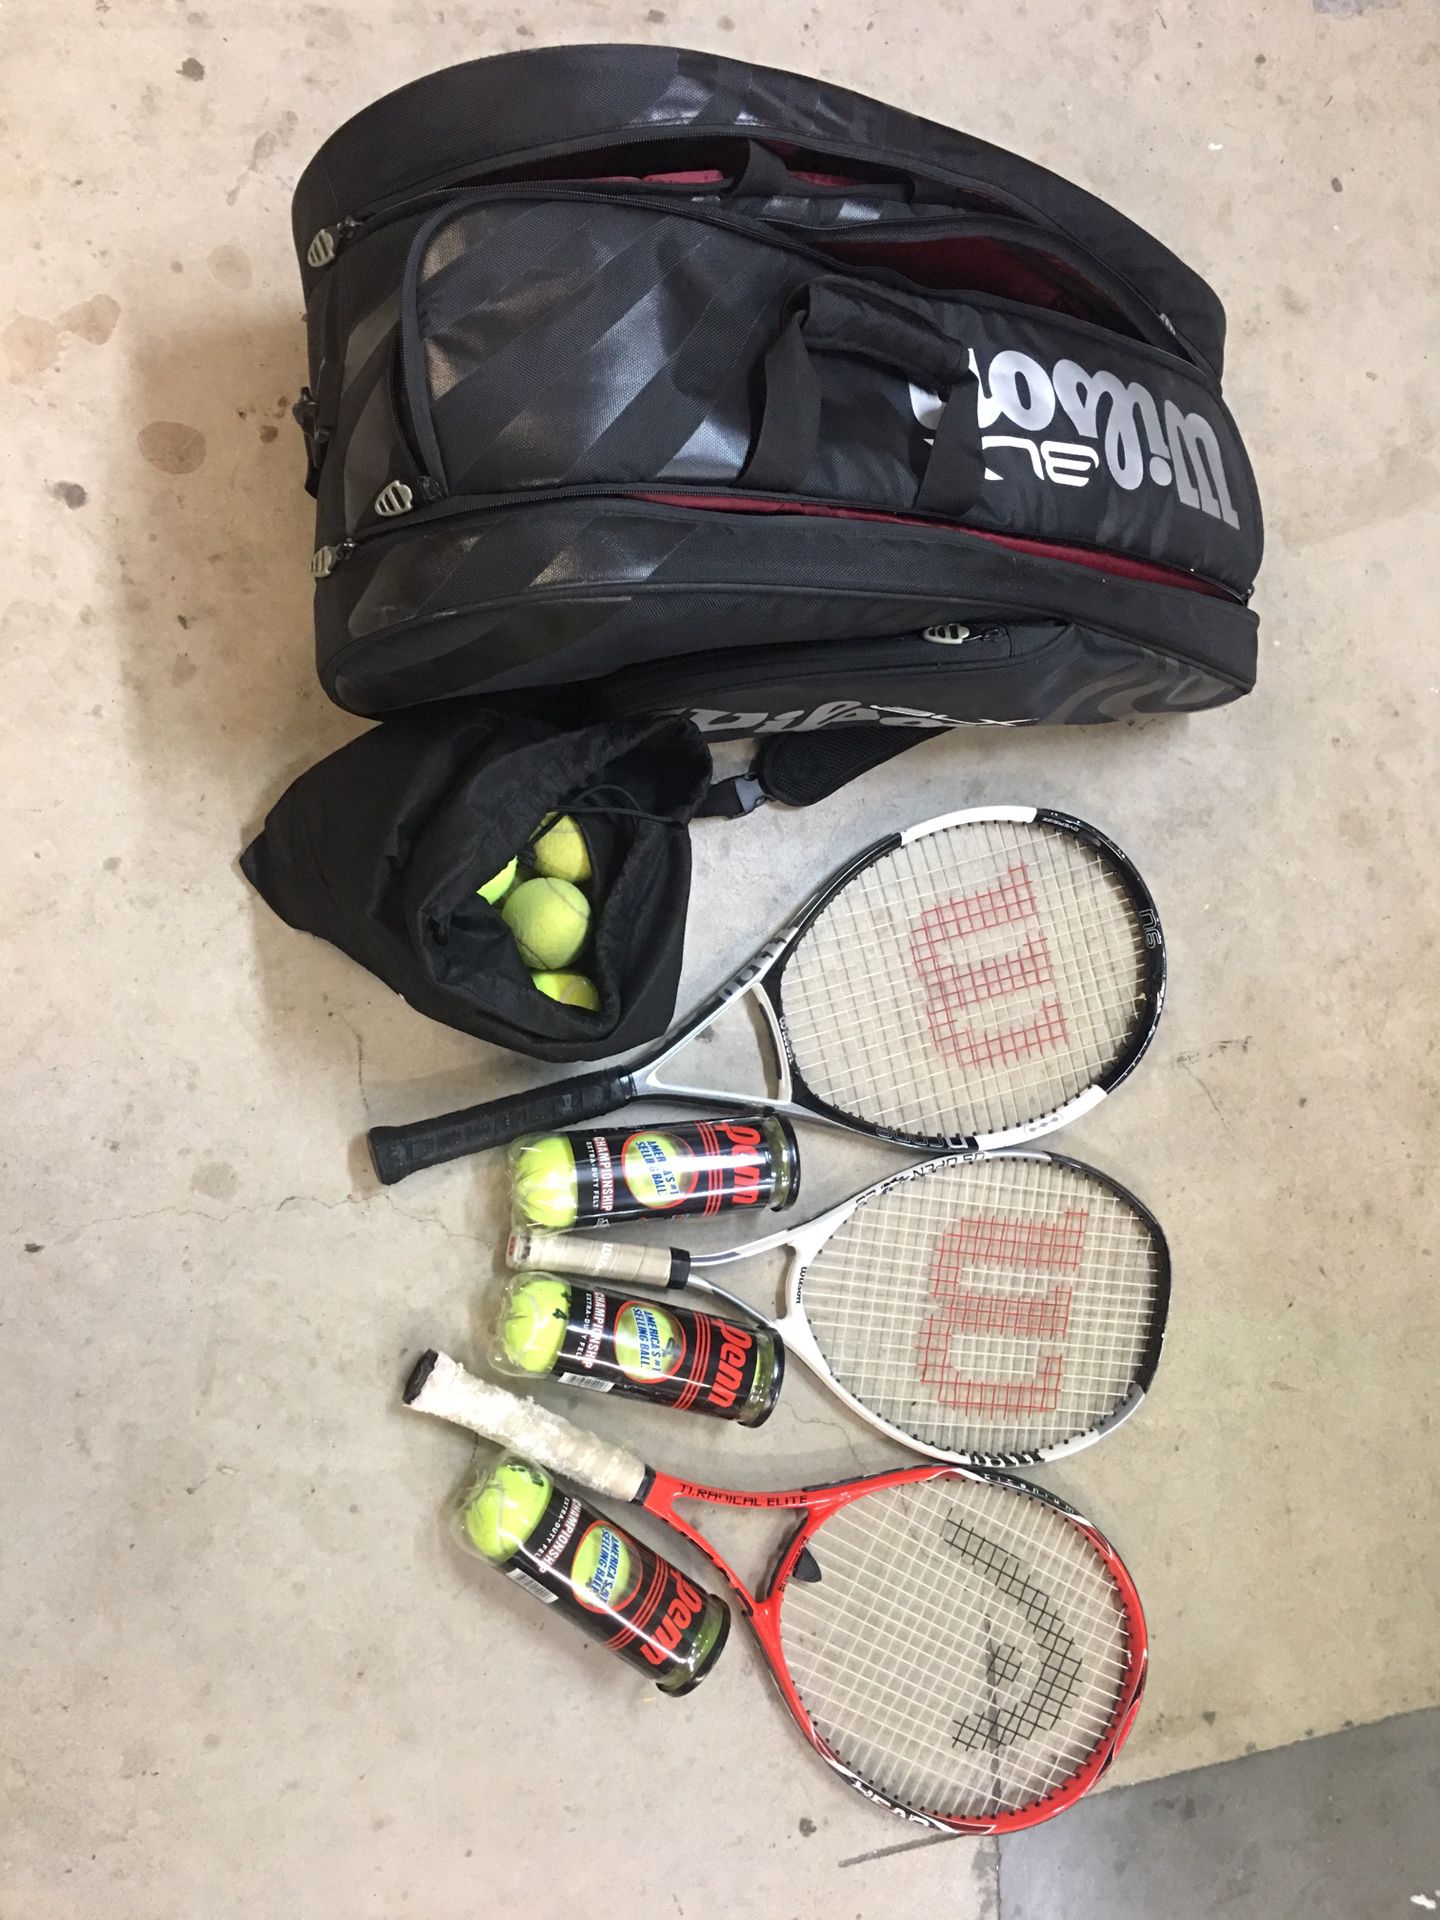 Tennis Rackets and supplies